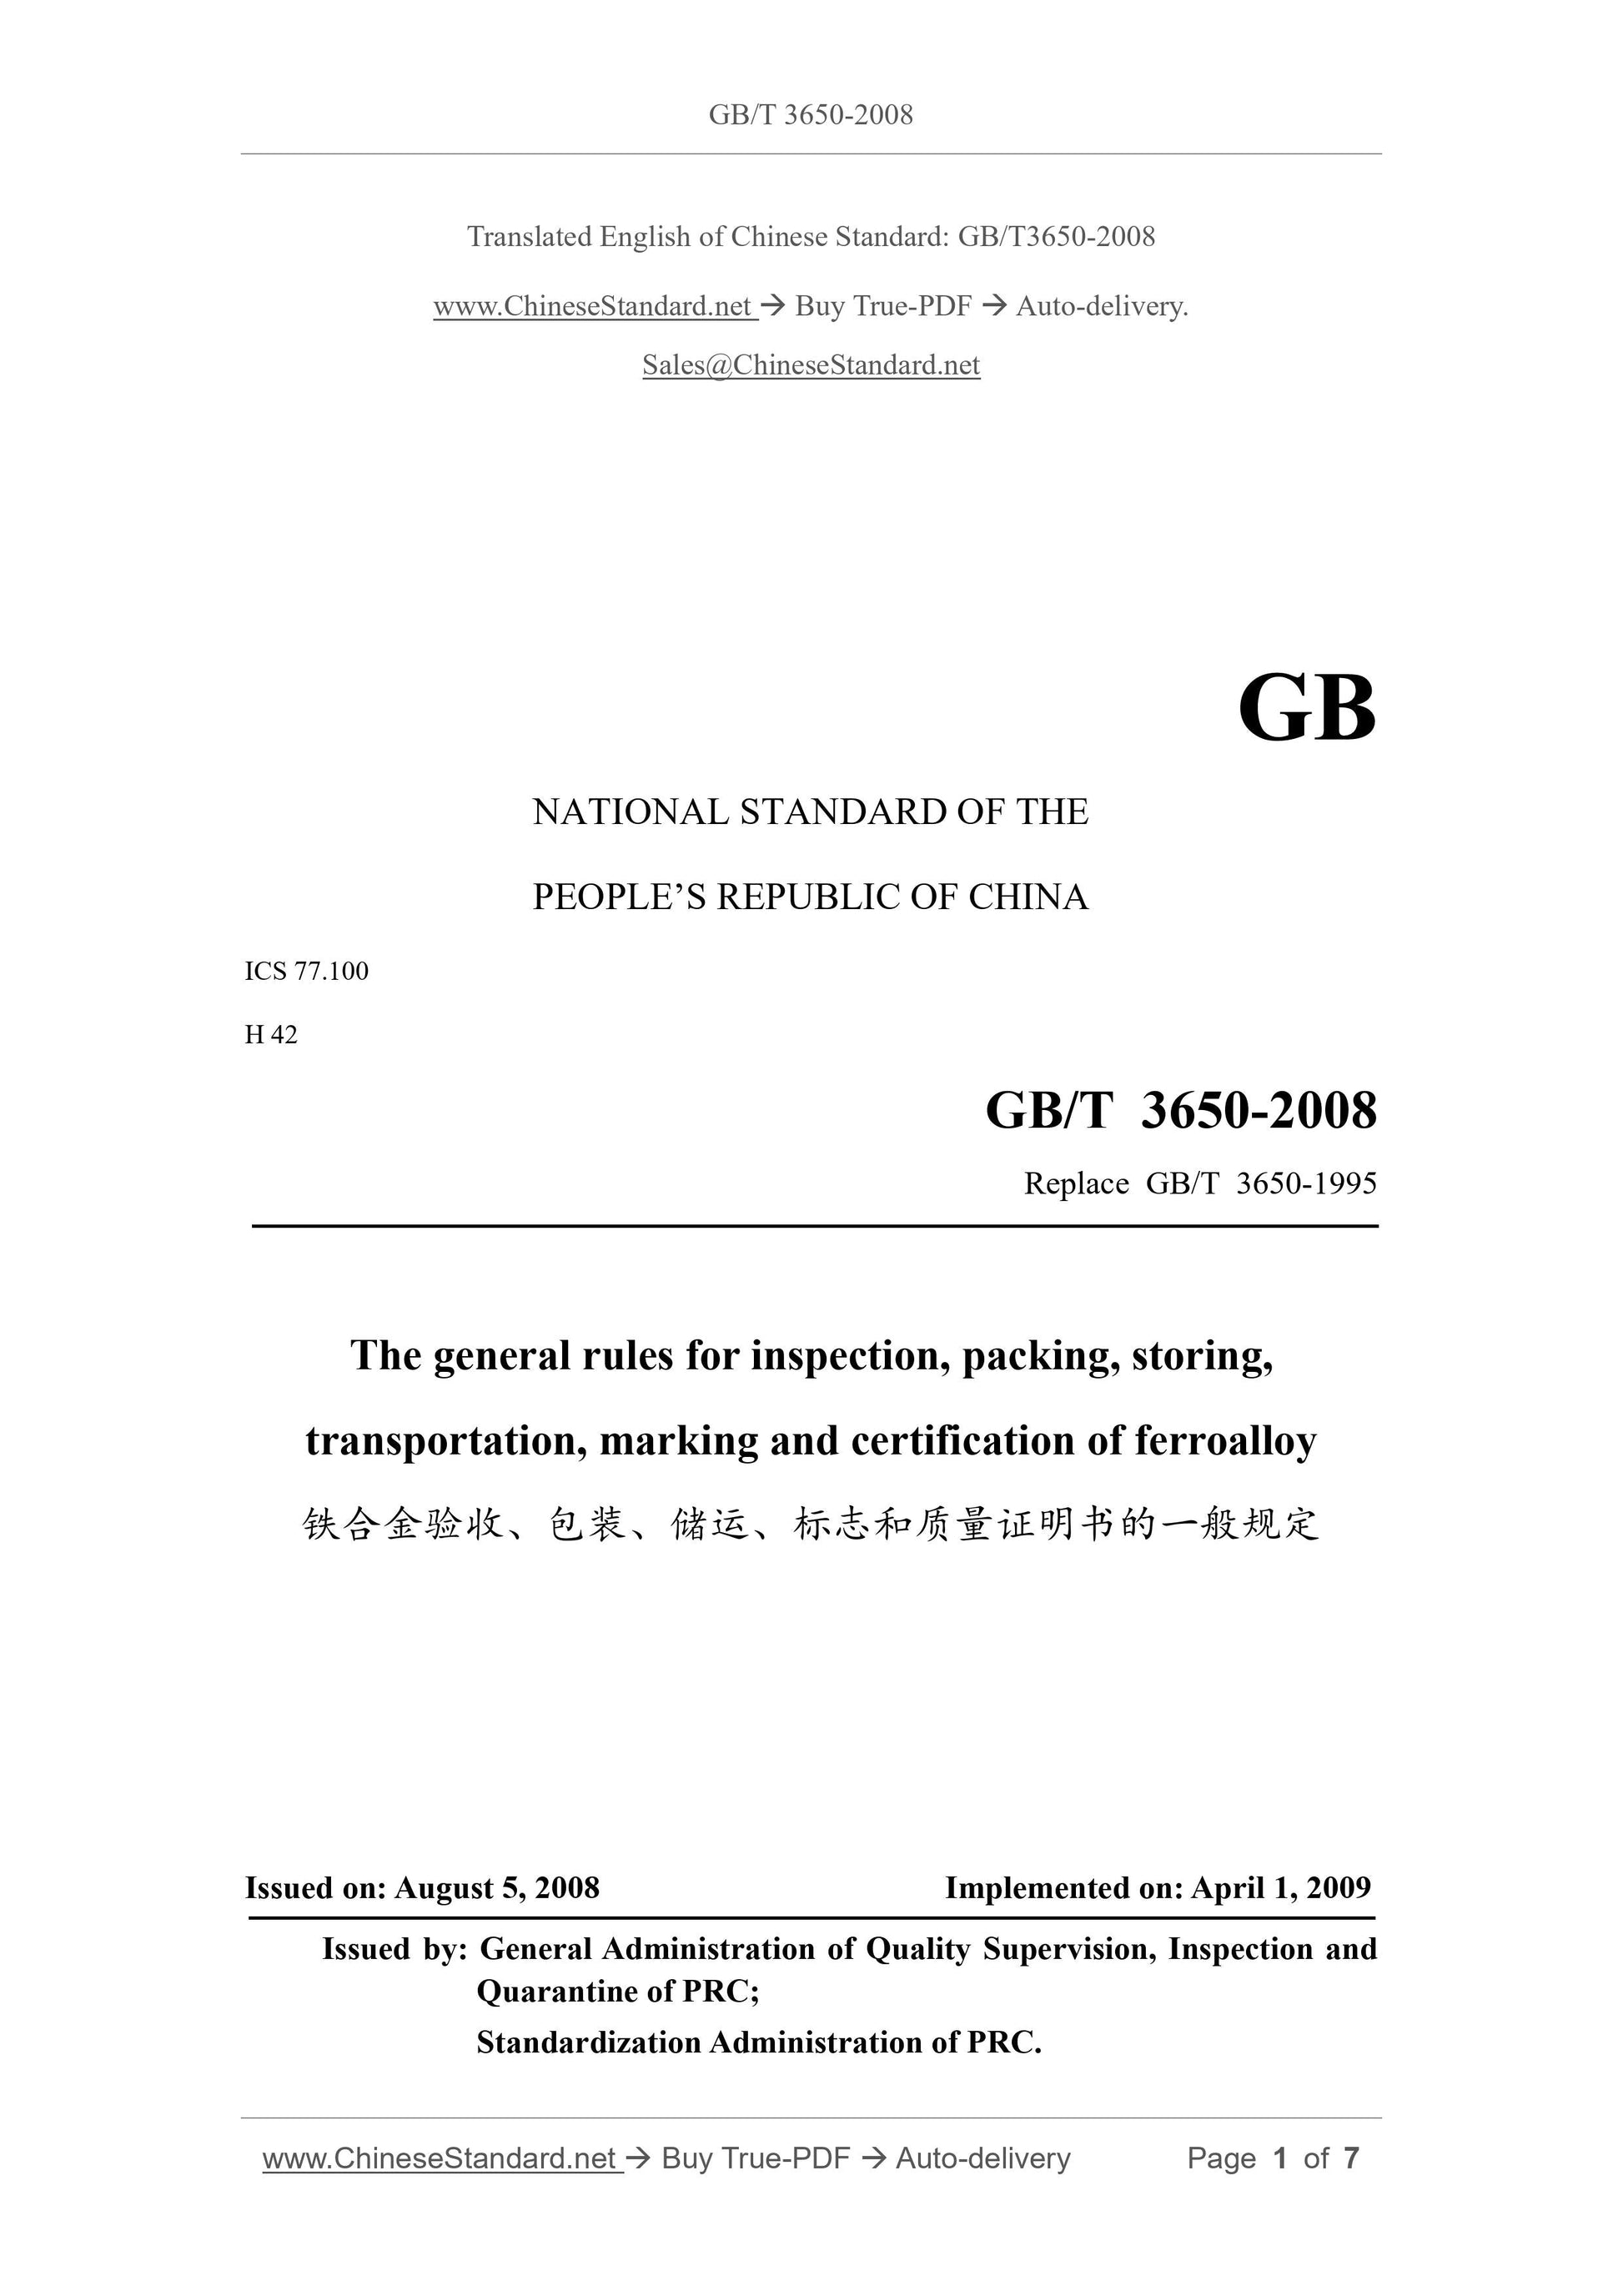 GB/T 3650-2008 Page 1